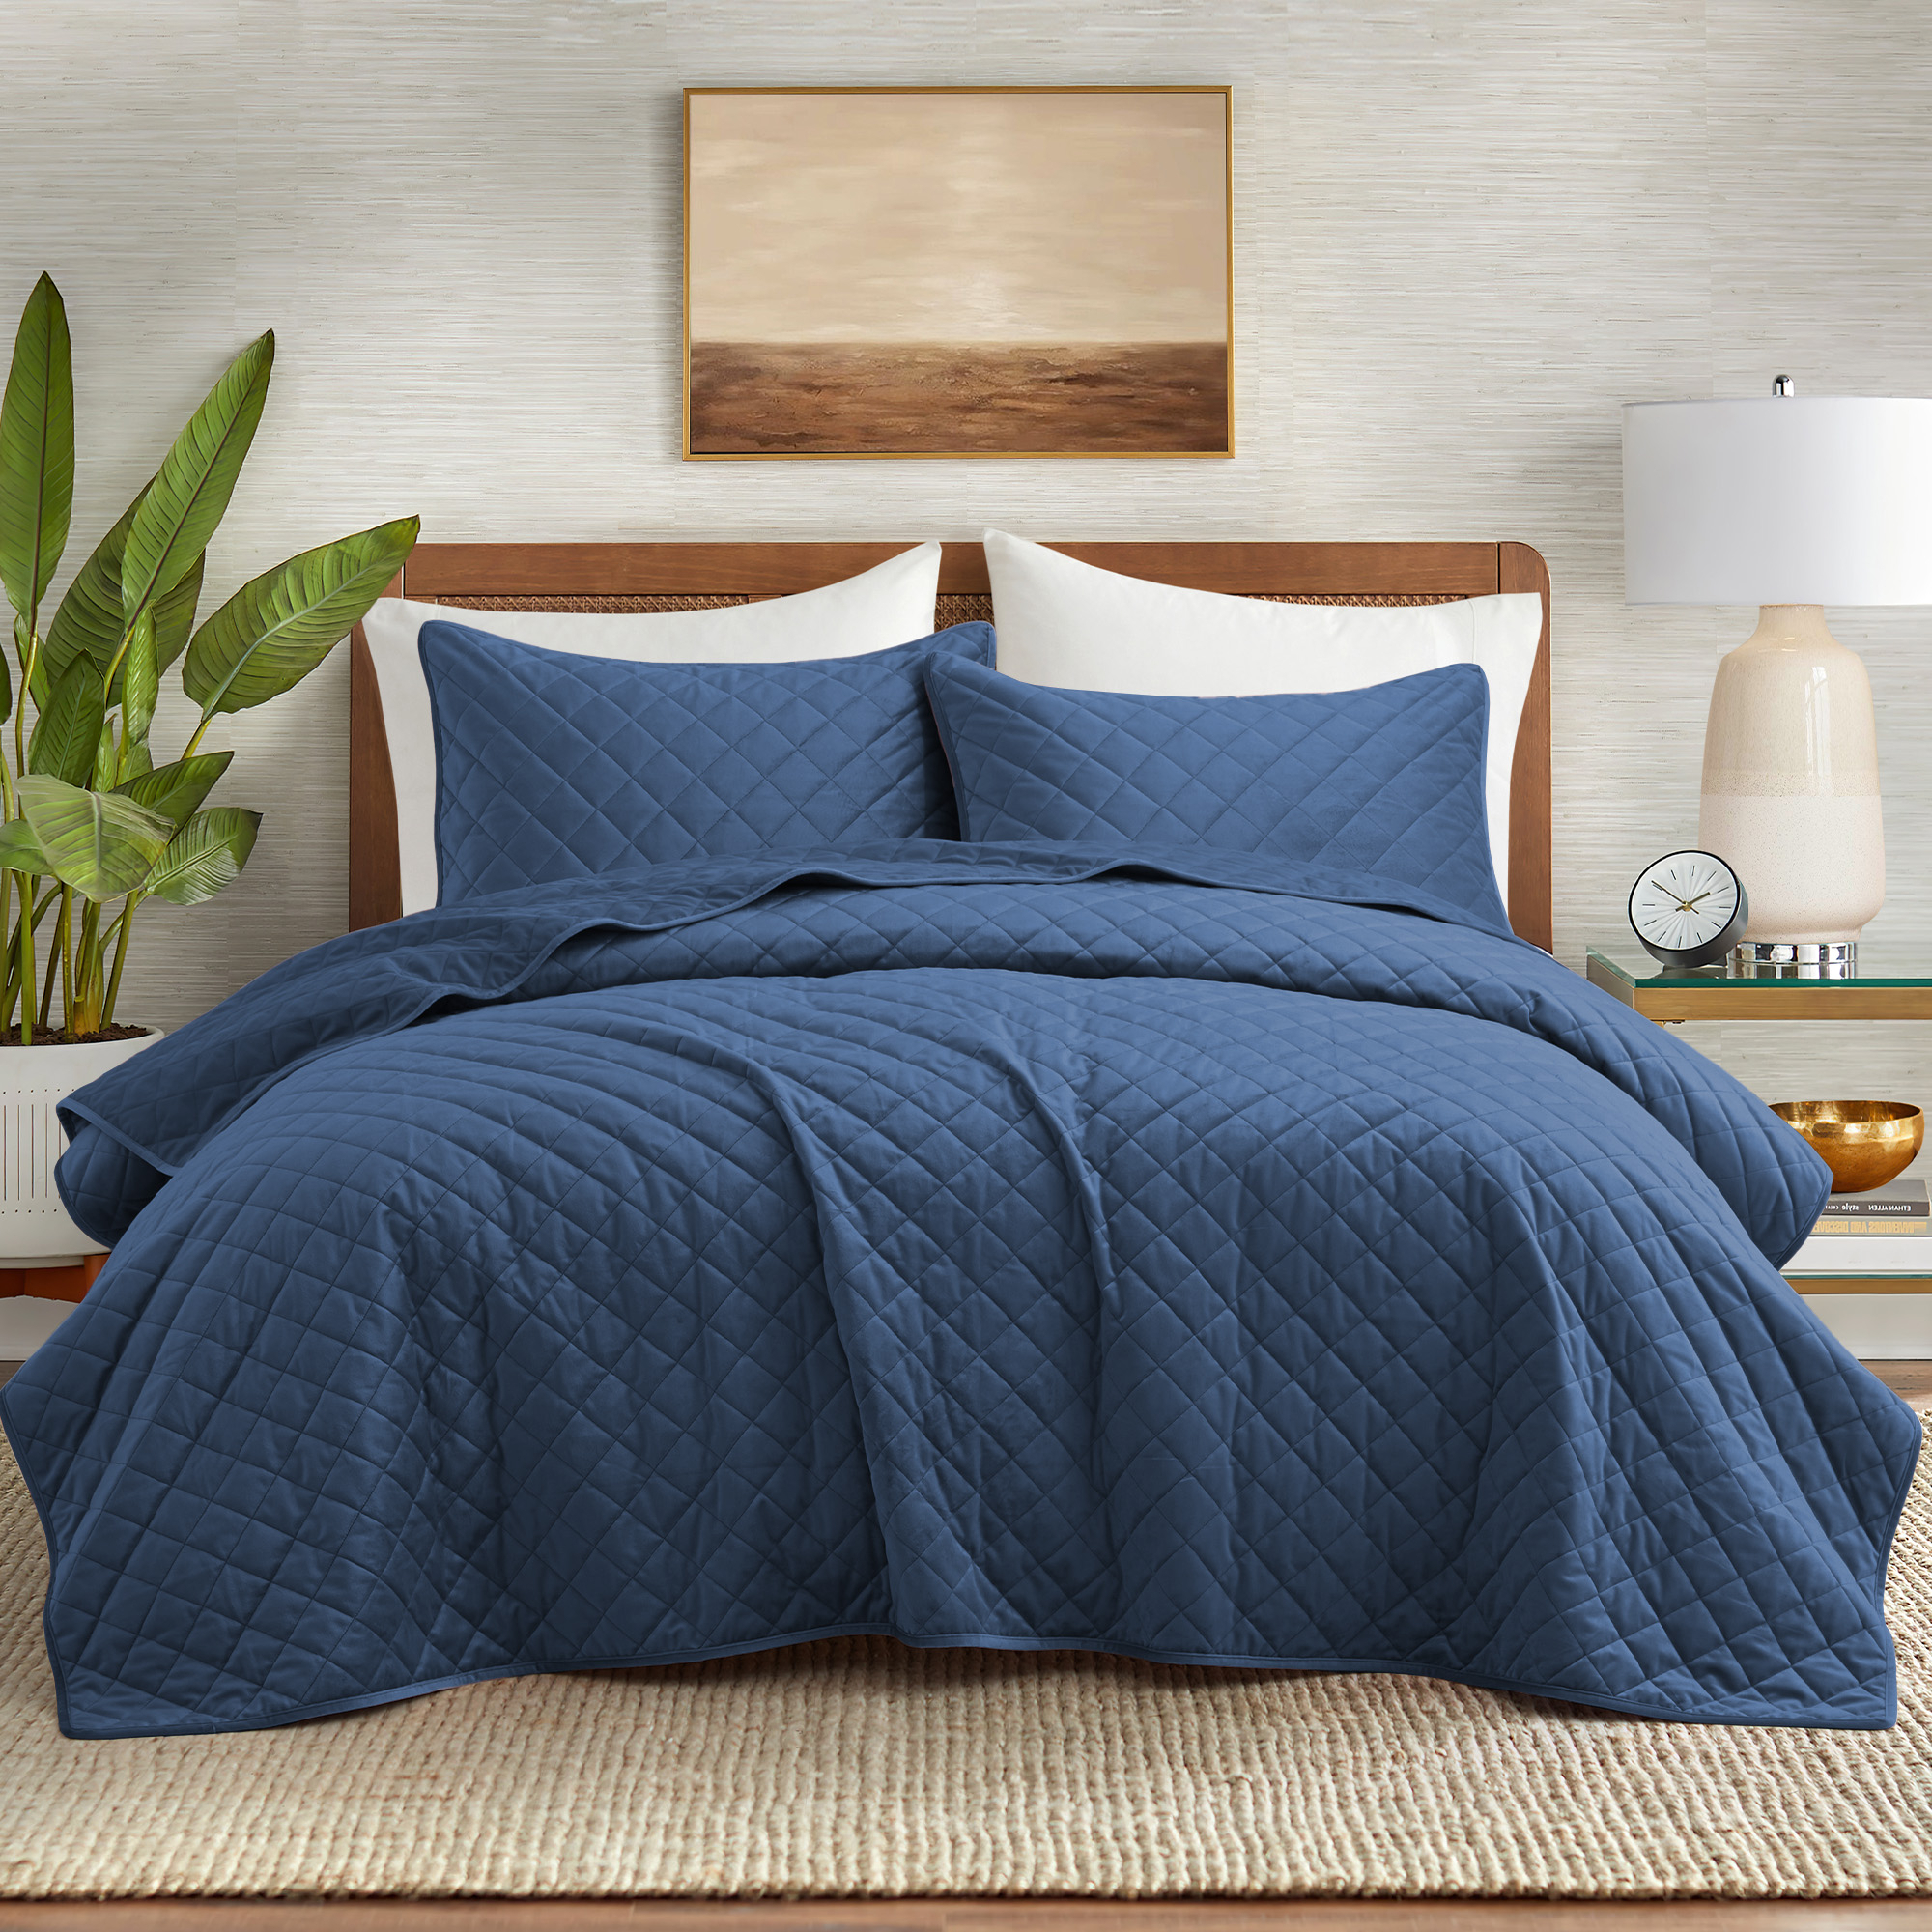 2 OR 3 Pieces Luxurious Reversible Velvet Coverlet Set With Shams - Navy, King